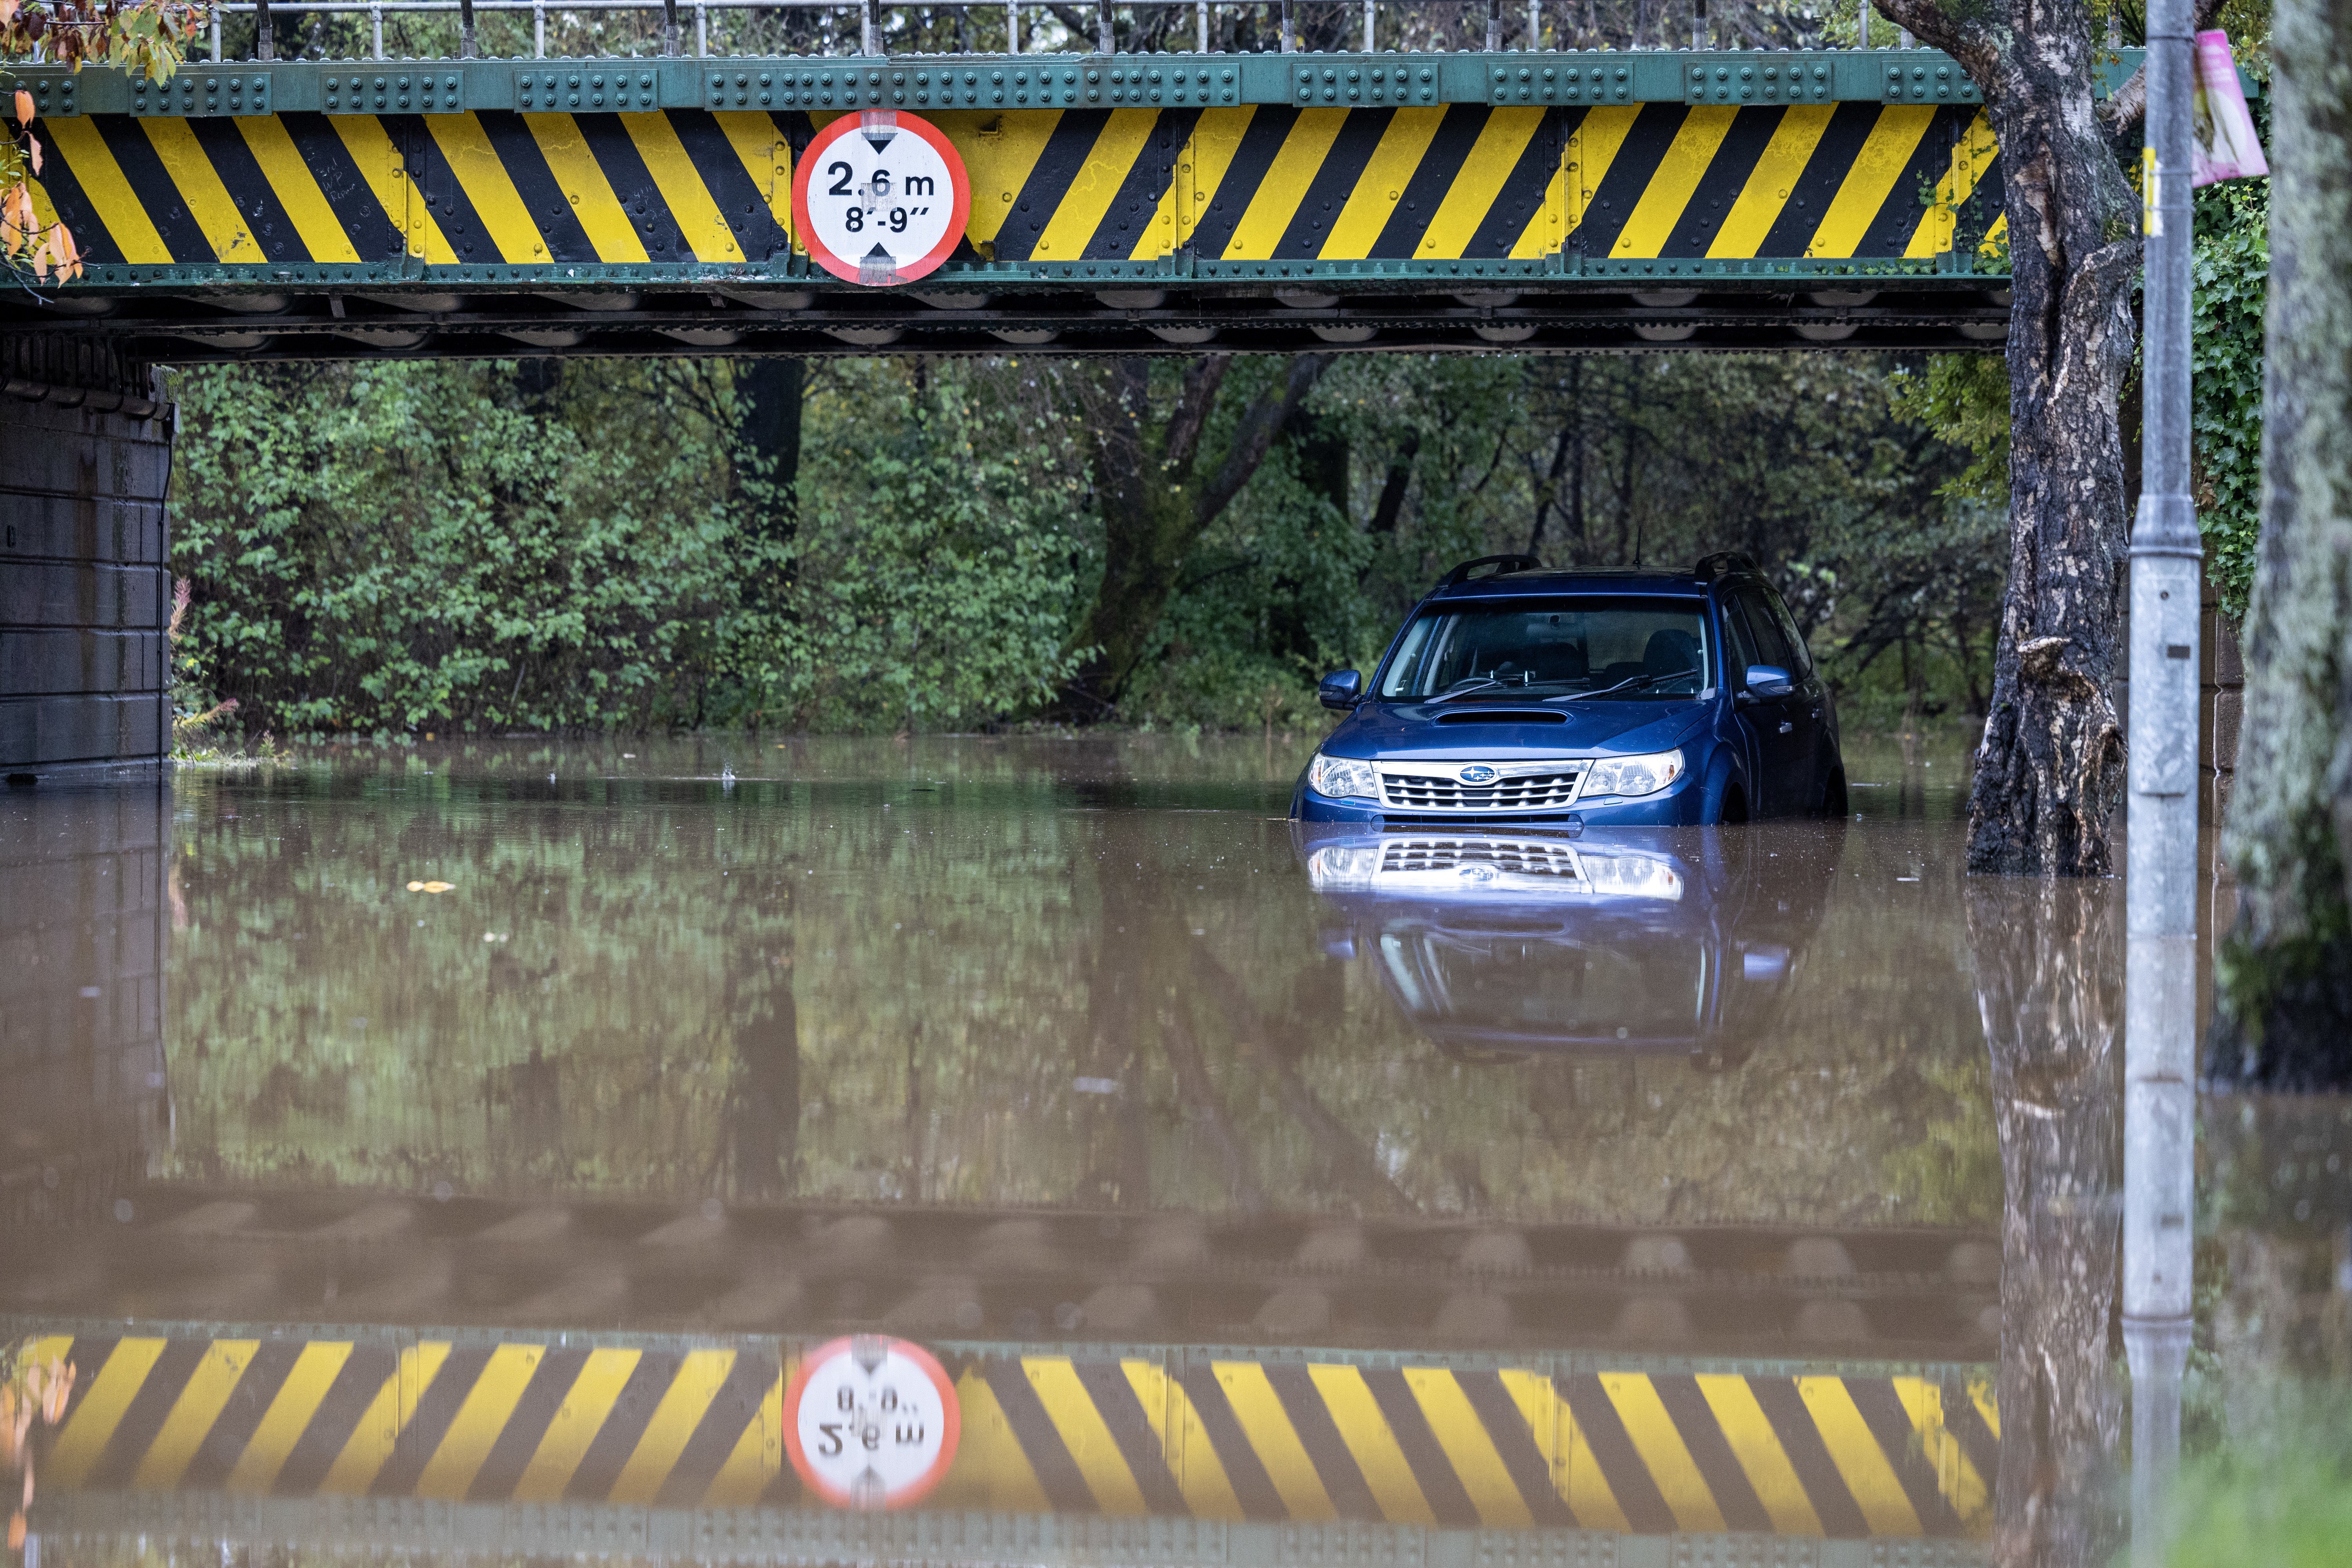 A car is left abandoned under a flooded railway bridge in West Dunbartonshire, as Scotland experiences extreme rainfall over the weekend, with 54 flood warnings issued